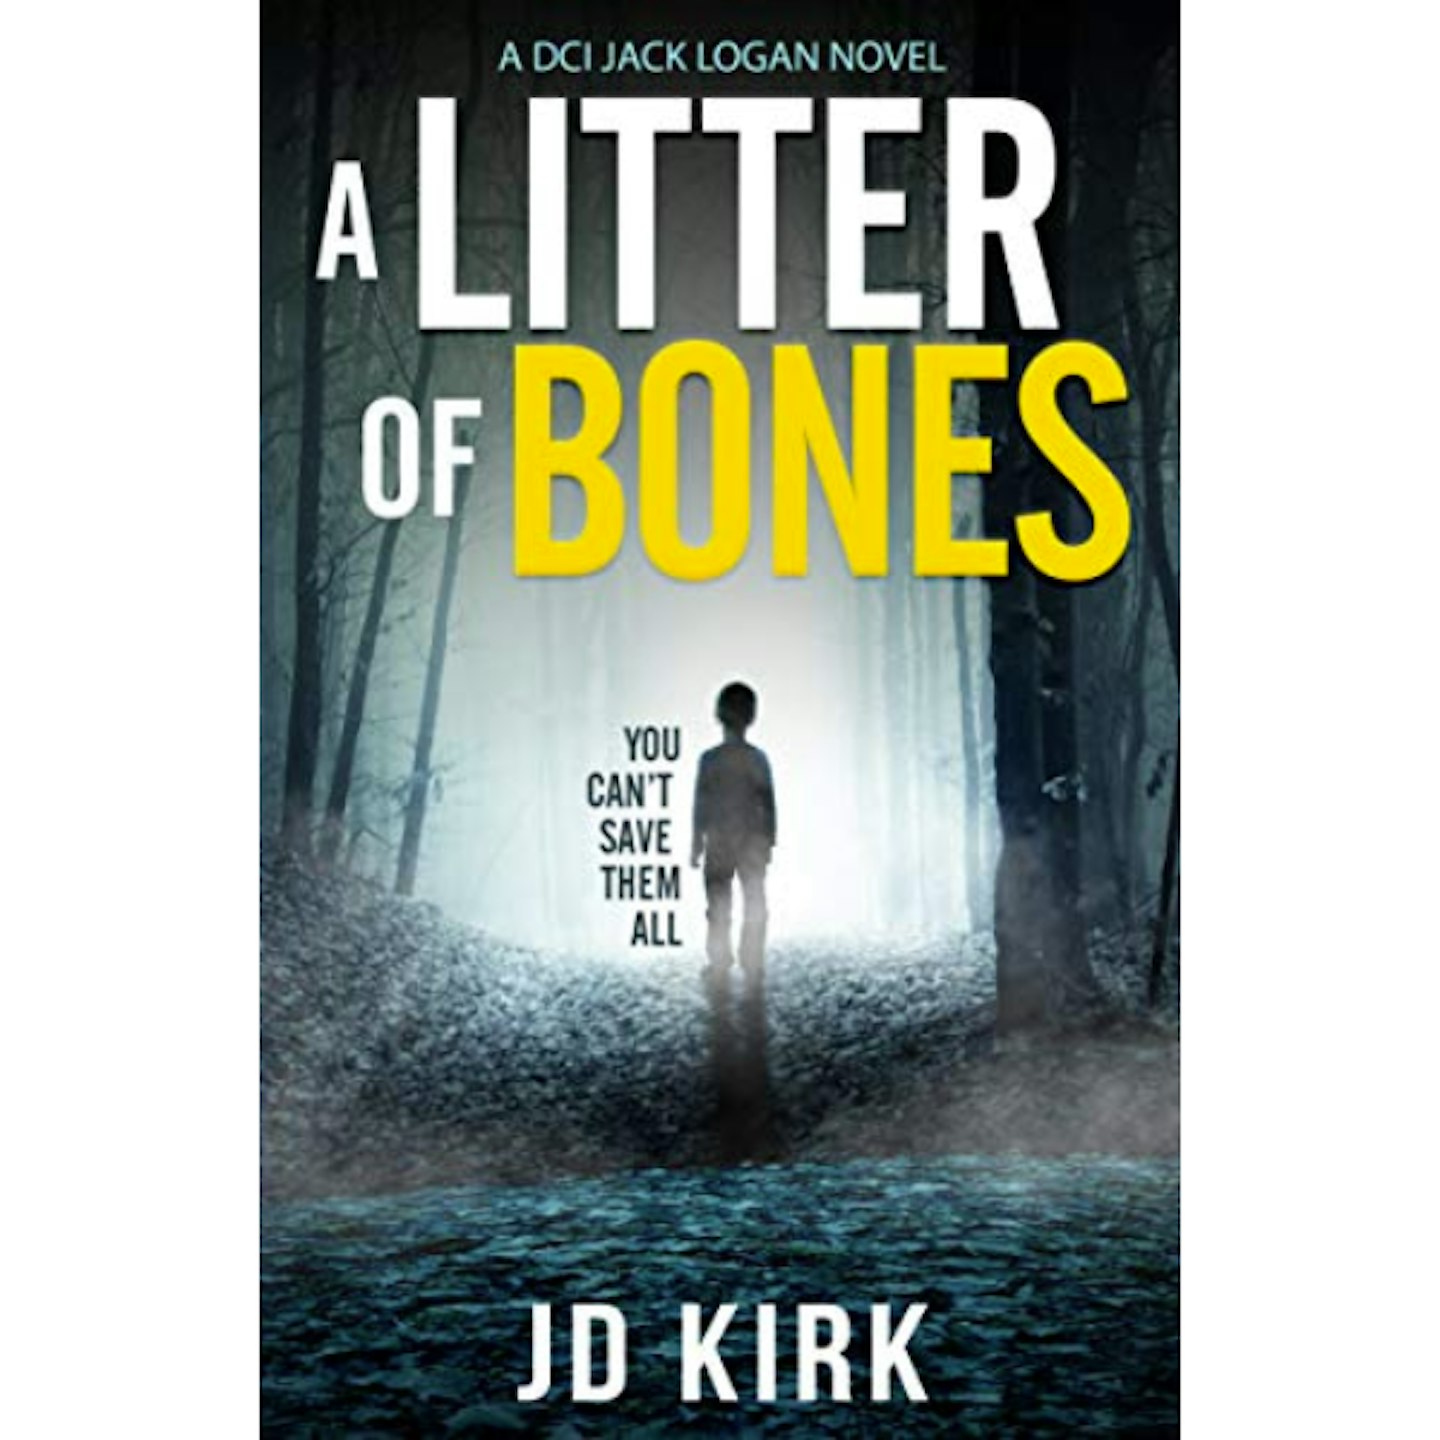 A Litter of Bones: A Scottish Detective Mystery by JD Kirk